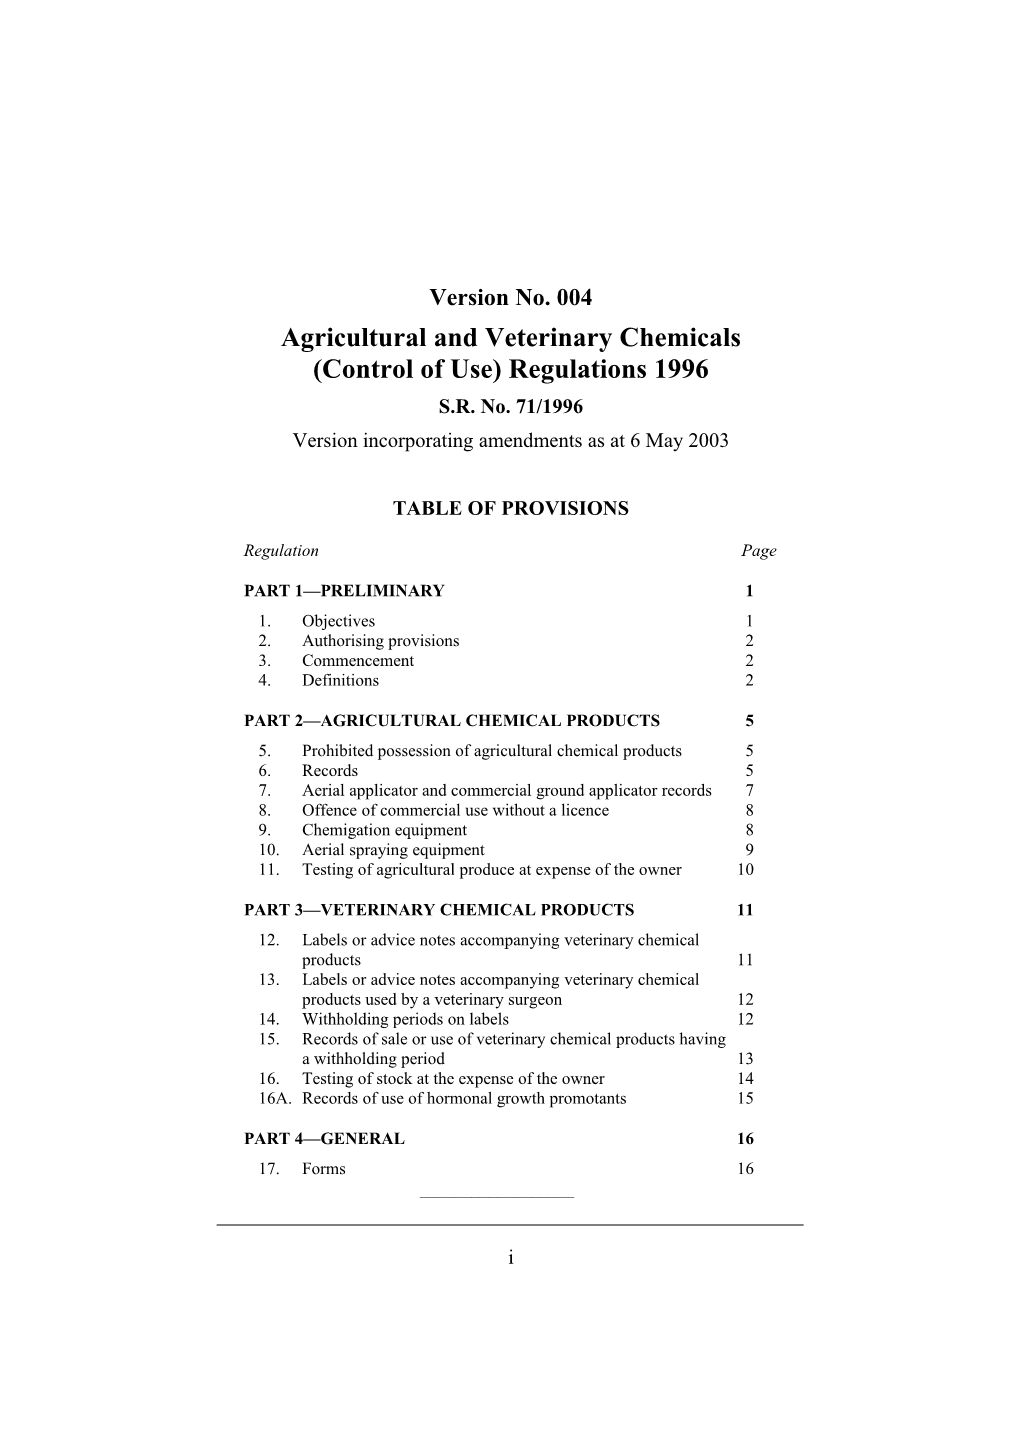 Agricultural and Veterinary Chemicals (Control of Use) Regulations 1996